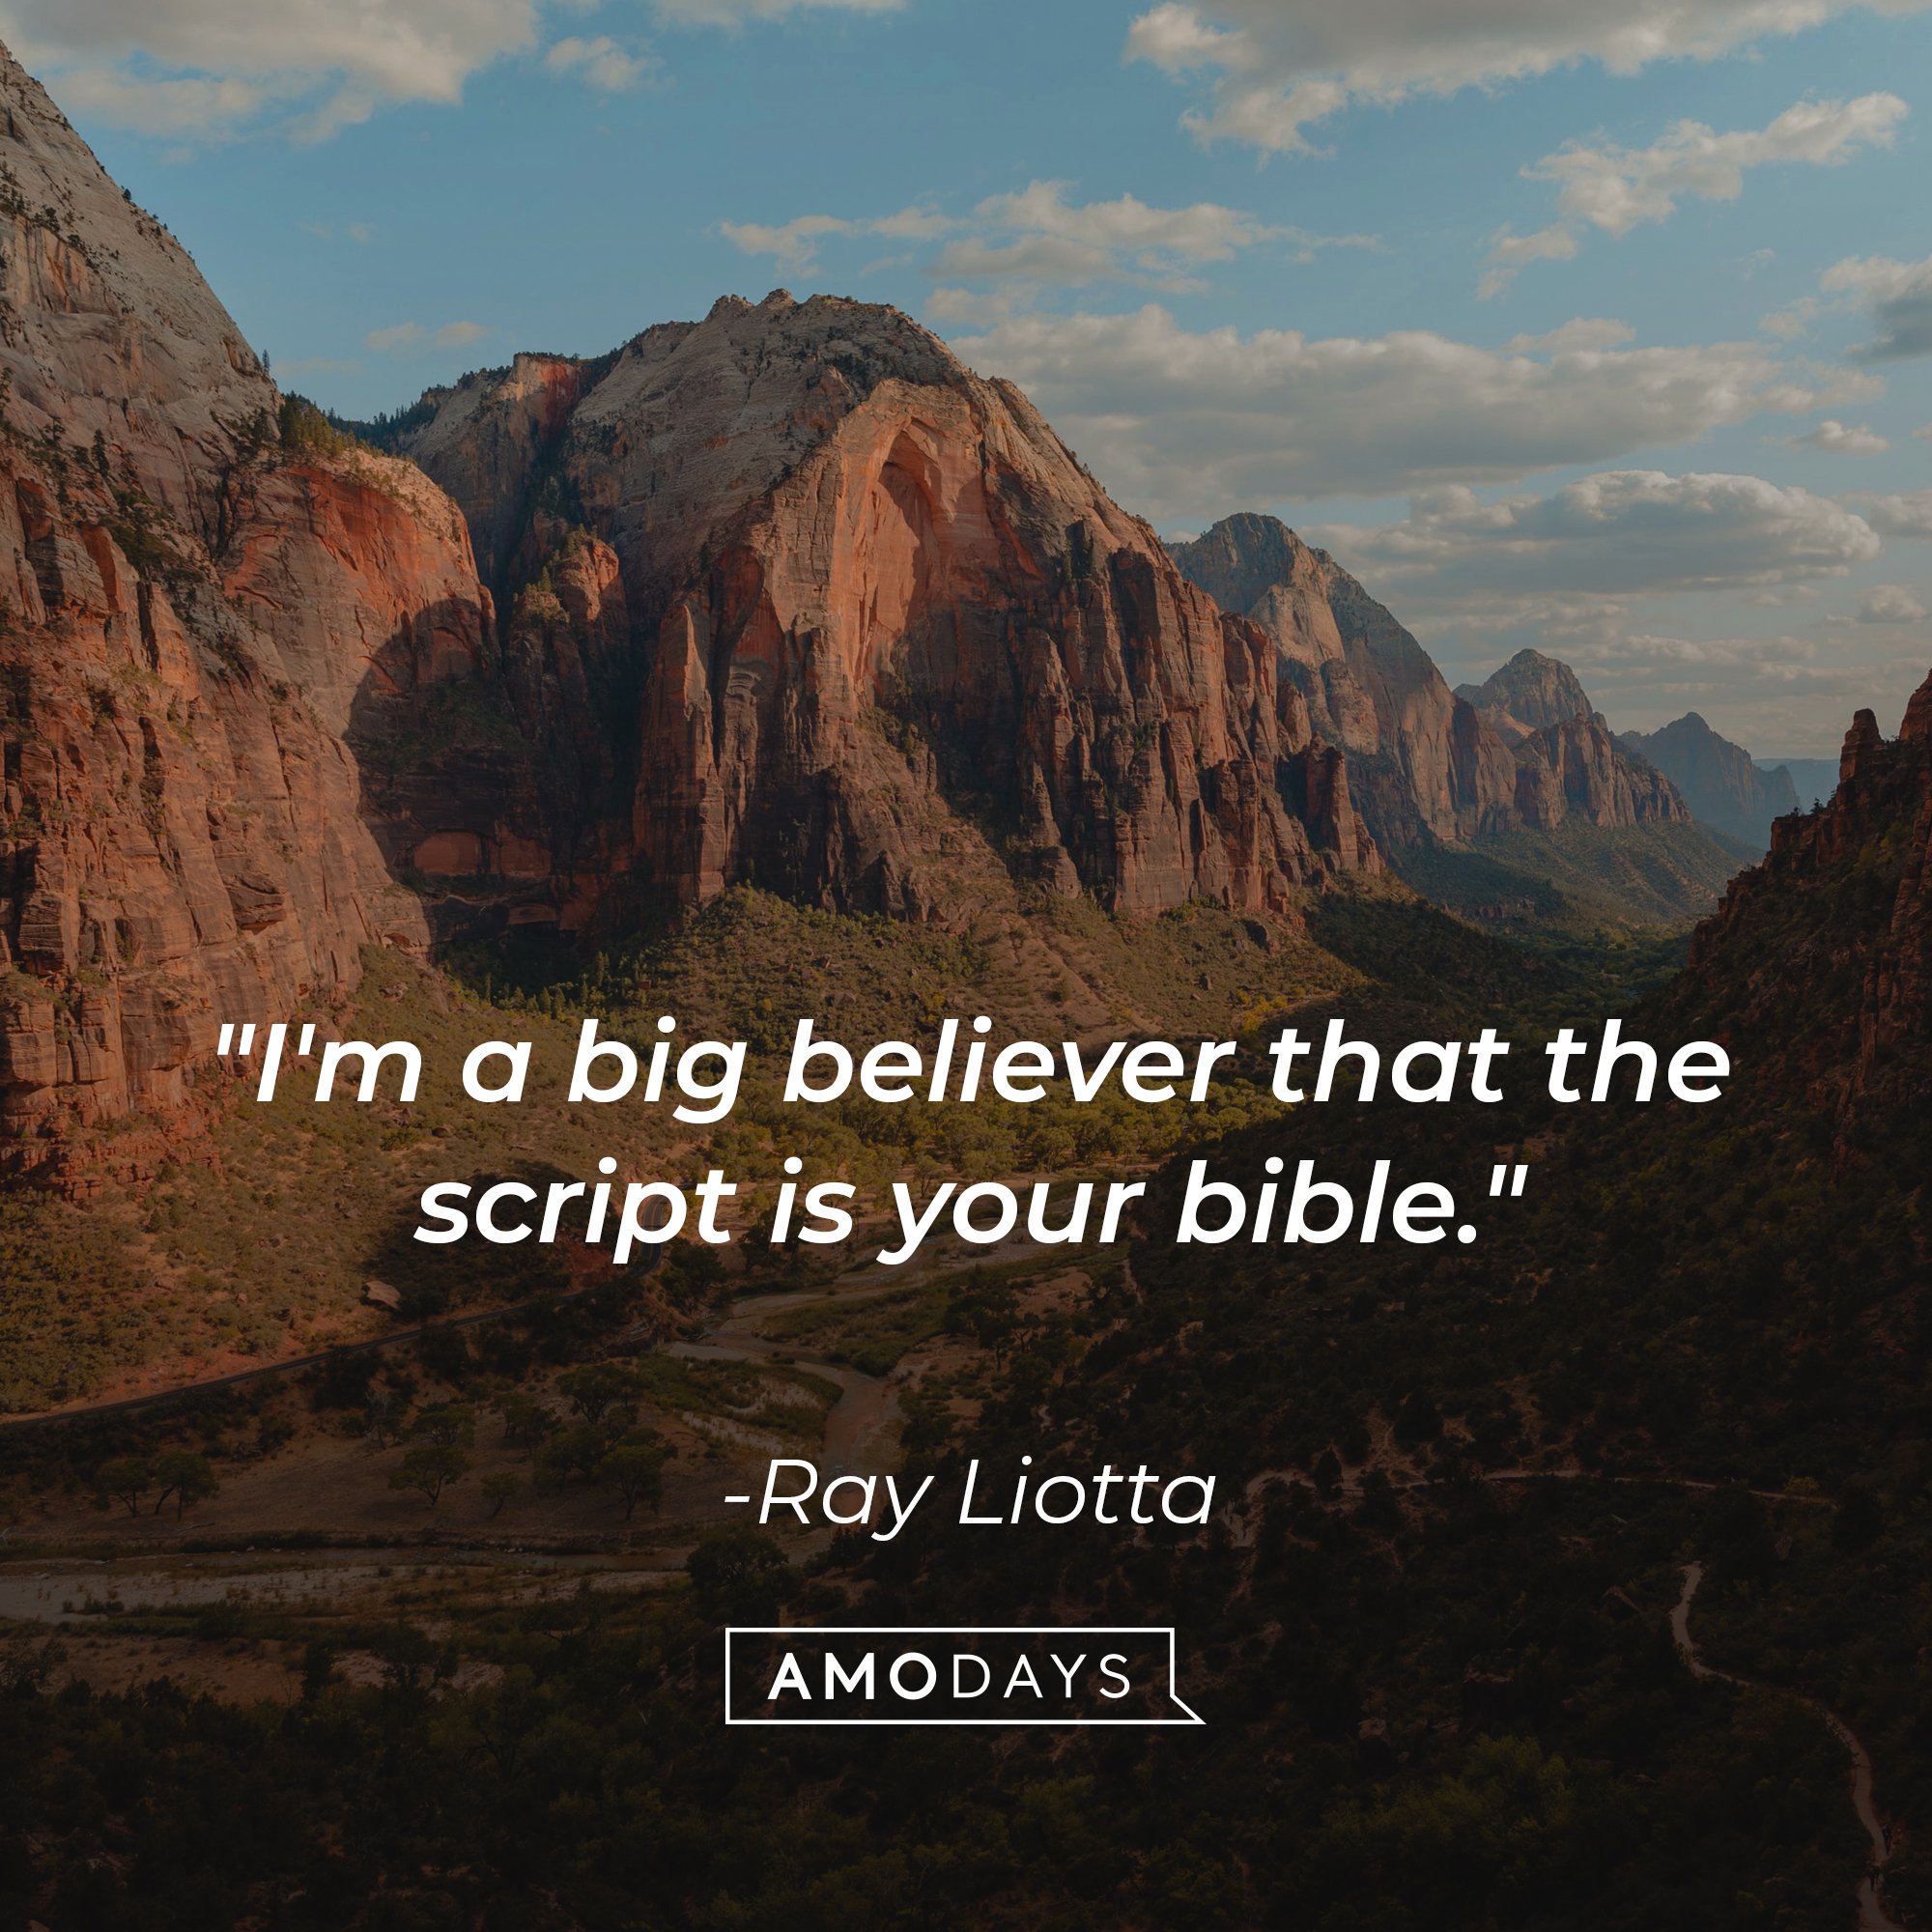 Ray Liotta's quote: "I'm a big believer that the script is your bible." | Image: AmoDays